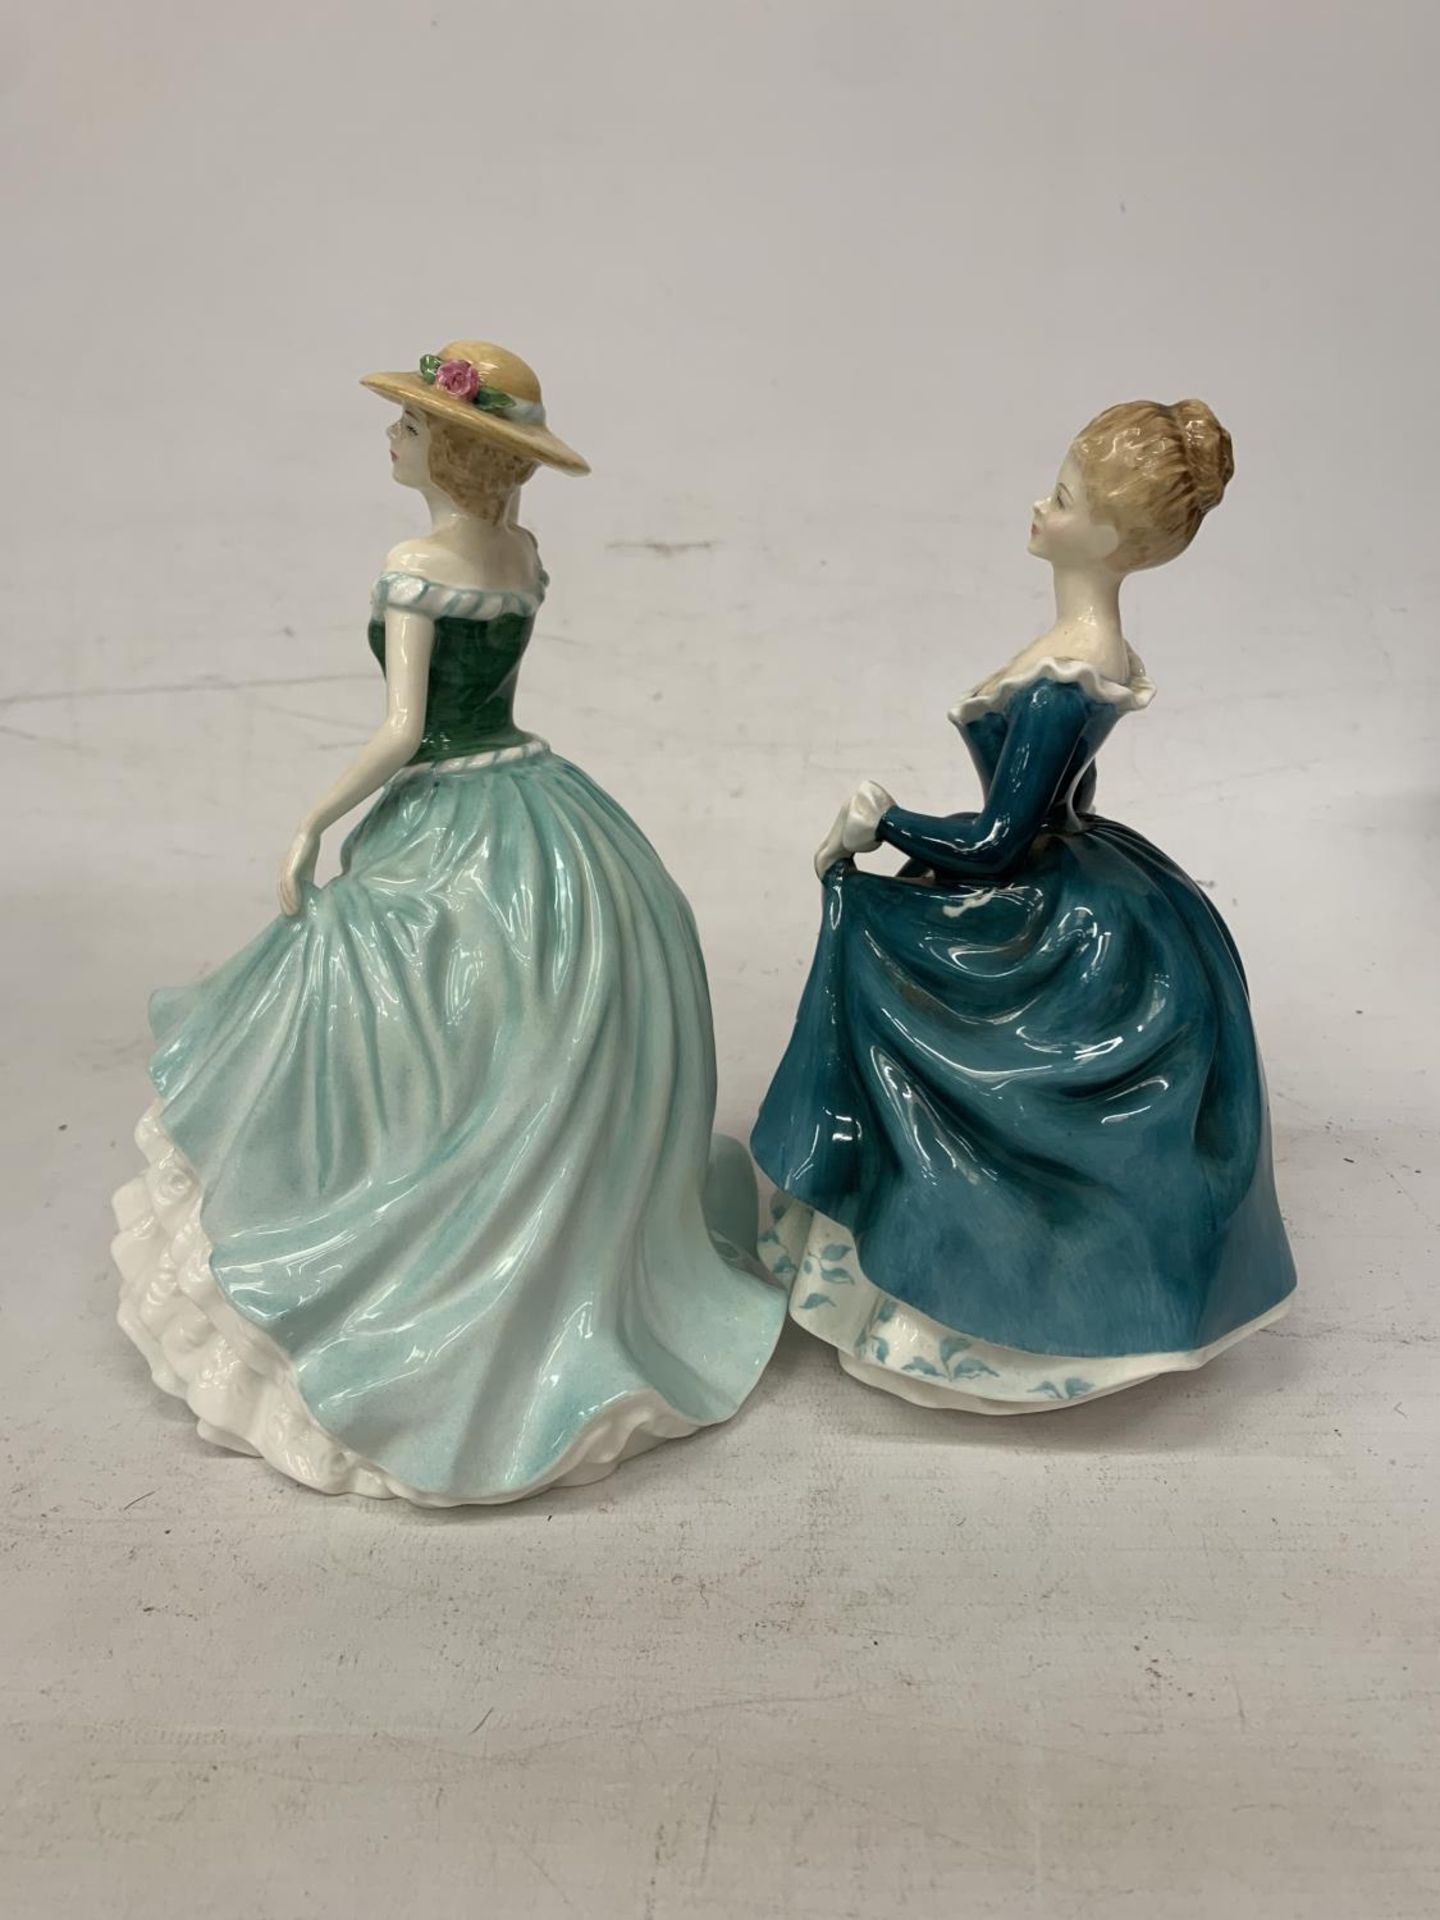 TWO ROYAL DOULTON FIGURES "JANINE" HN 2461 AND "EMILY" HN 4093 - Image 3 of 4